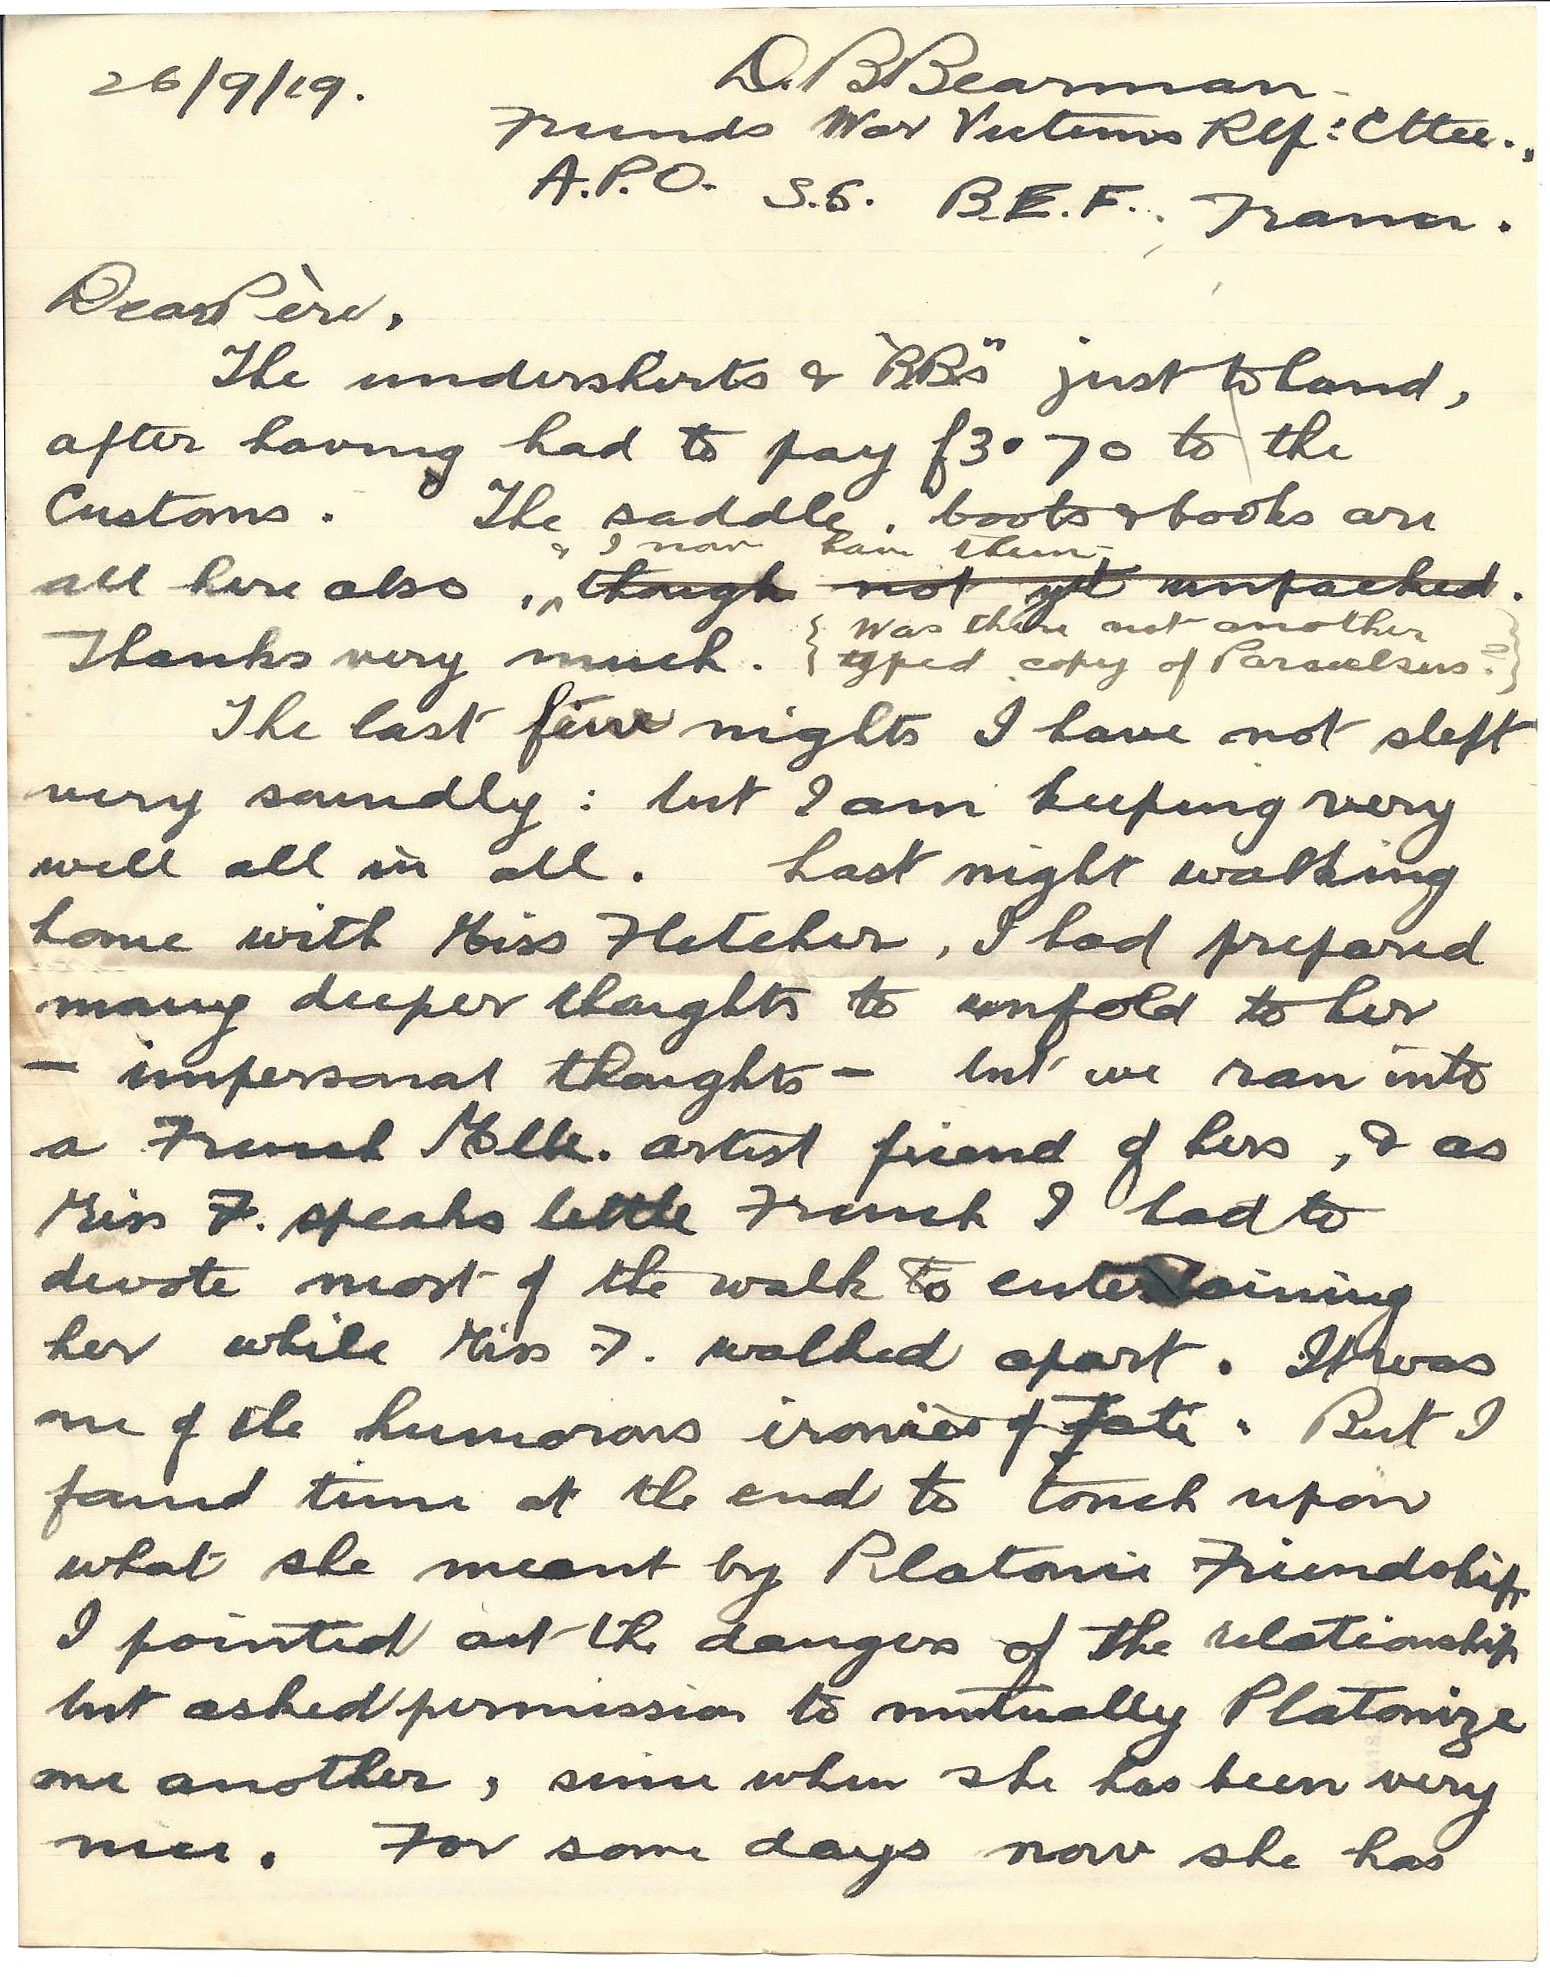 1919-09-26 Page 1 letter by Donald Bearman